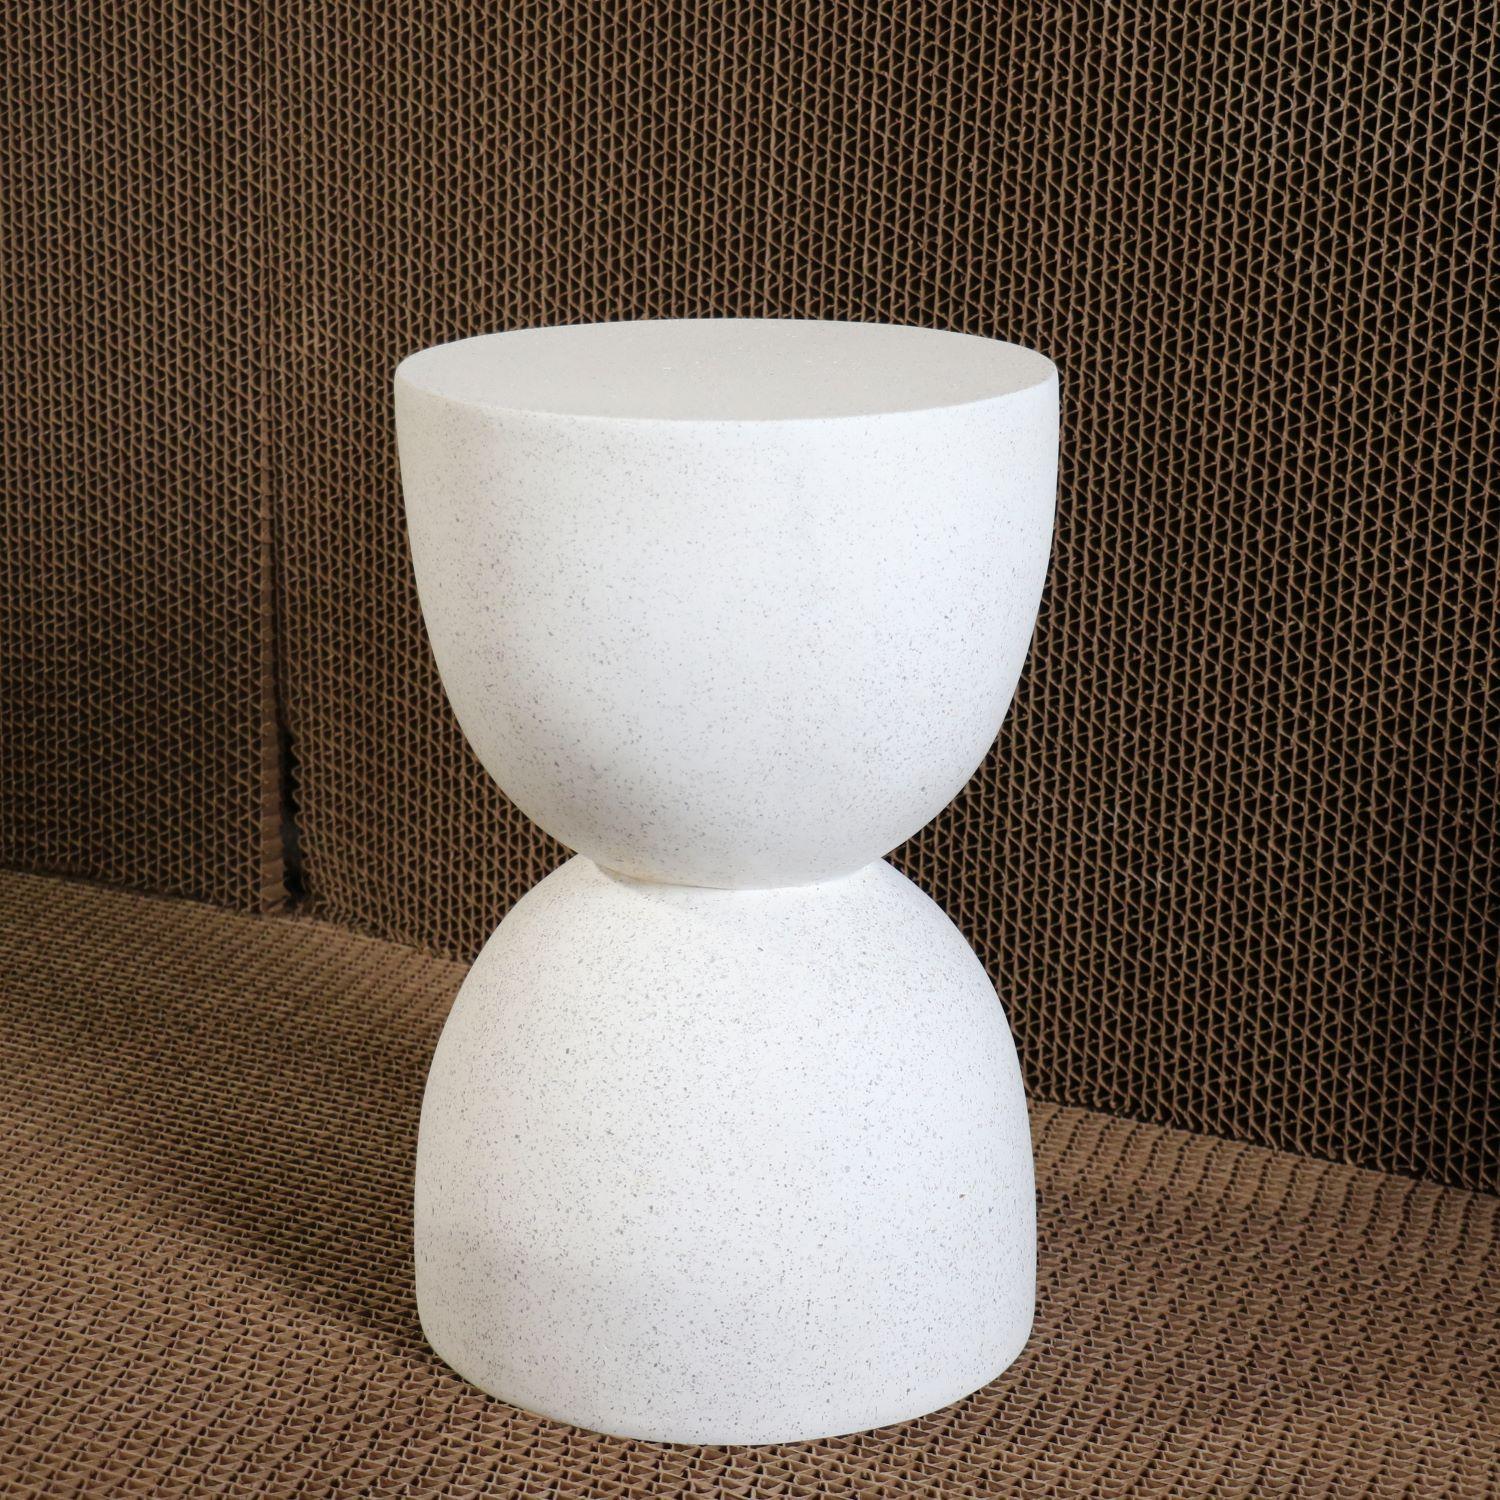 A symmetrical sculptural balance of elegance and function. 

Dimensions: Diameter 12 in. (30 cm), height 18 in. (46 cm). Weight 20 lbs. (9 kg).

Finish color options:
white stone (shown)
natural stone
aged stone
keystone
coal stone

Materials: